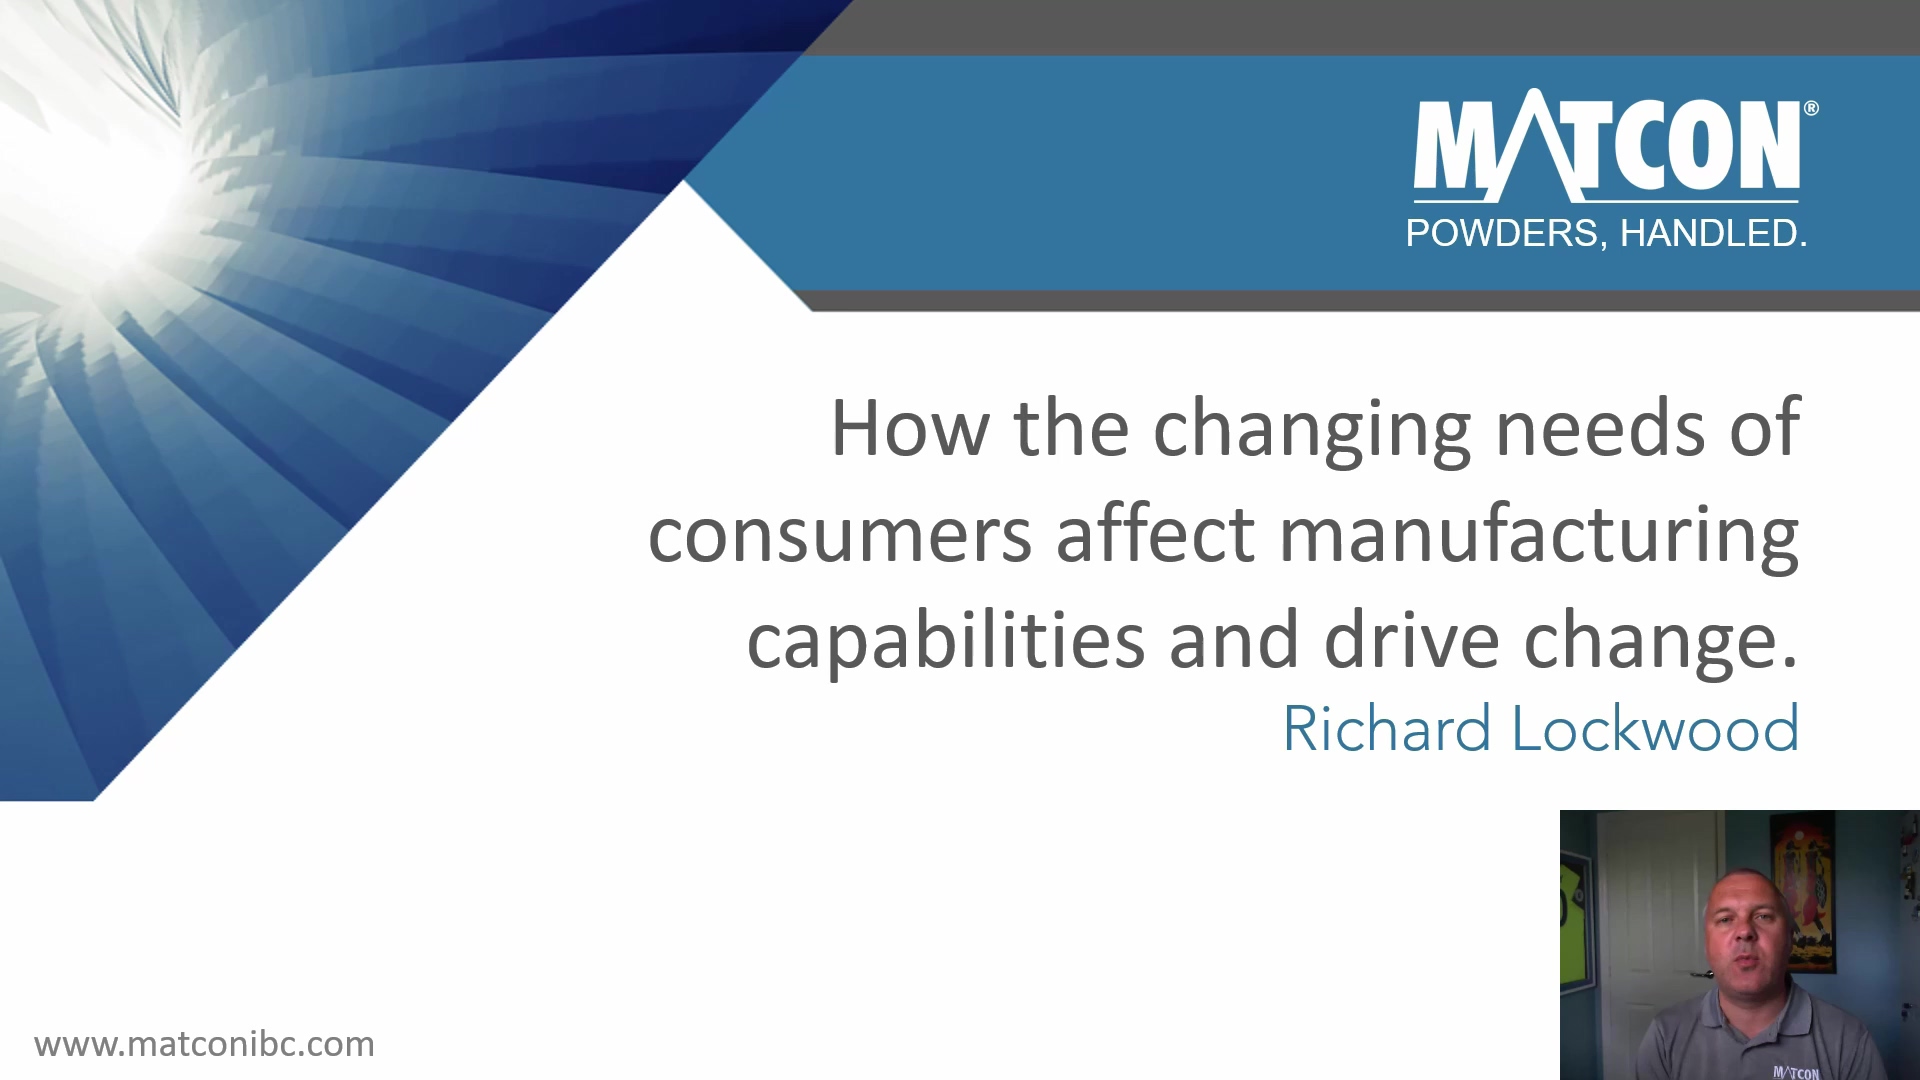 How the changing needs of consumers affect manufacturers